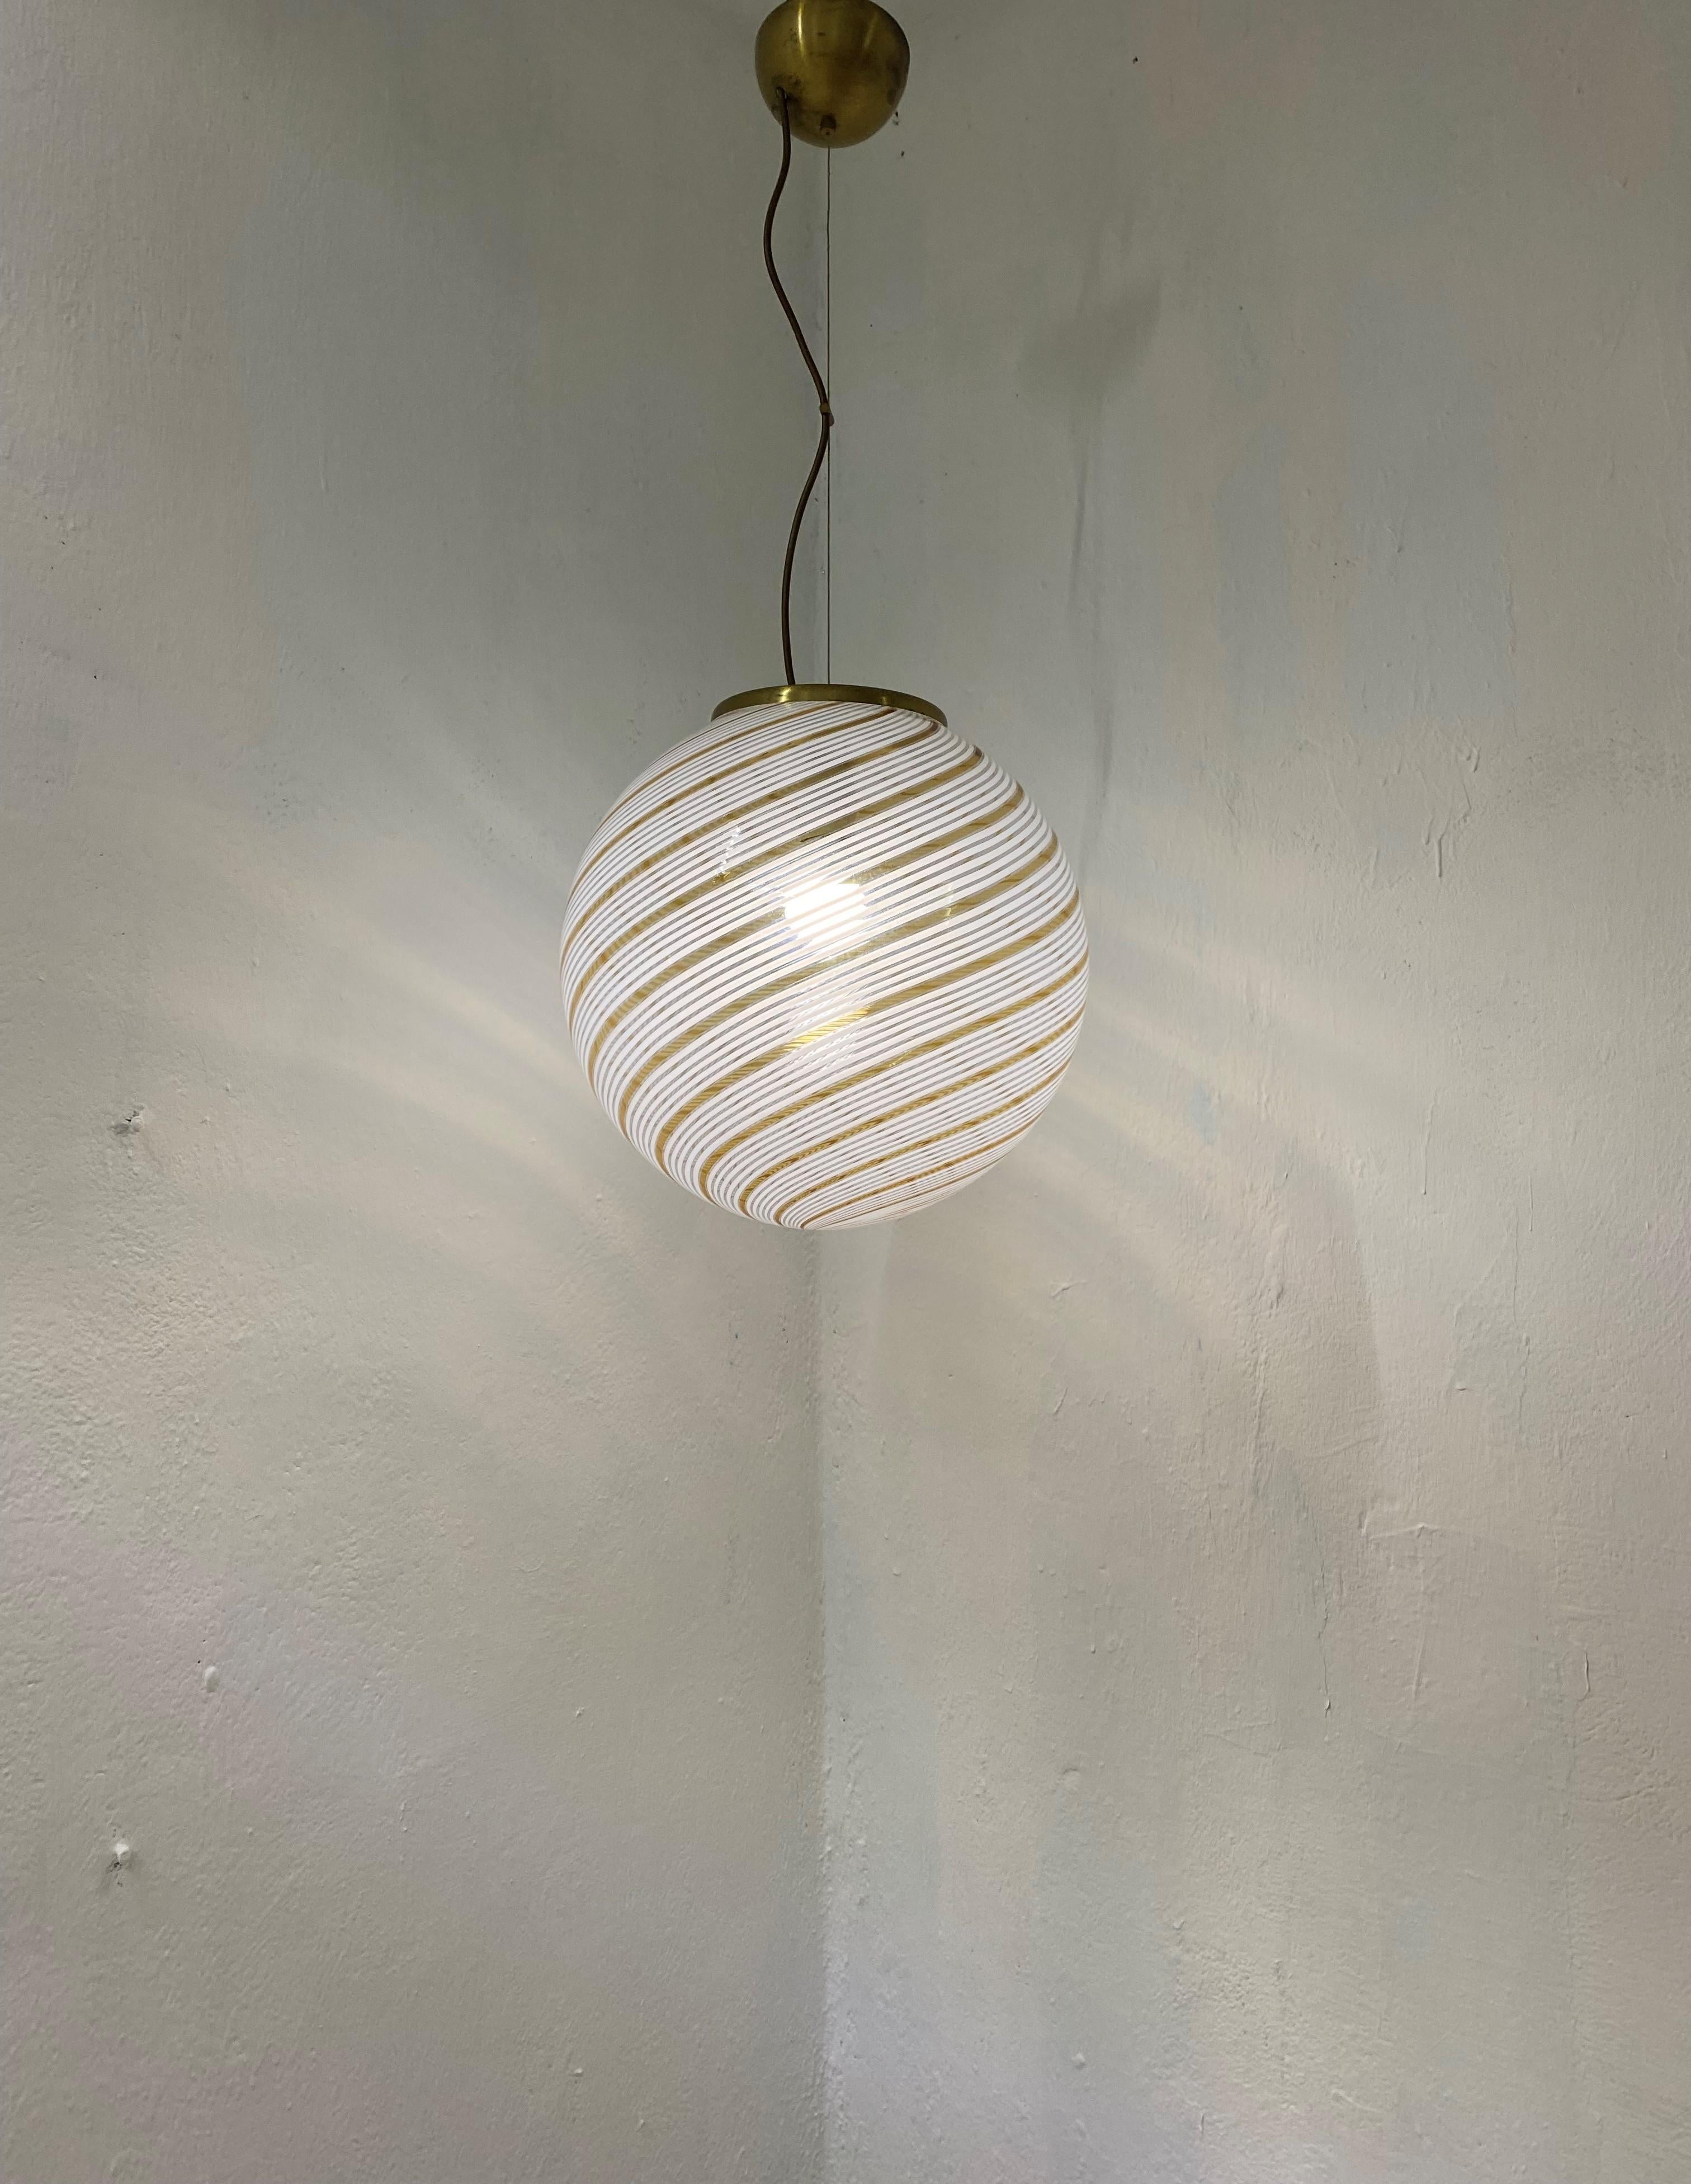 Beautiful and large pendant sphere in white and orange (yellow) and clear hand-blown Murano glass, attributed to Venini, circa 1970
The Bulb used will dramatically change the effect of the lamp when lit, please see the last 3 photos for the